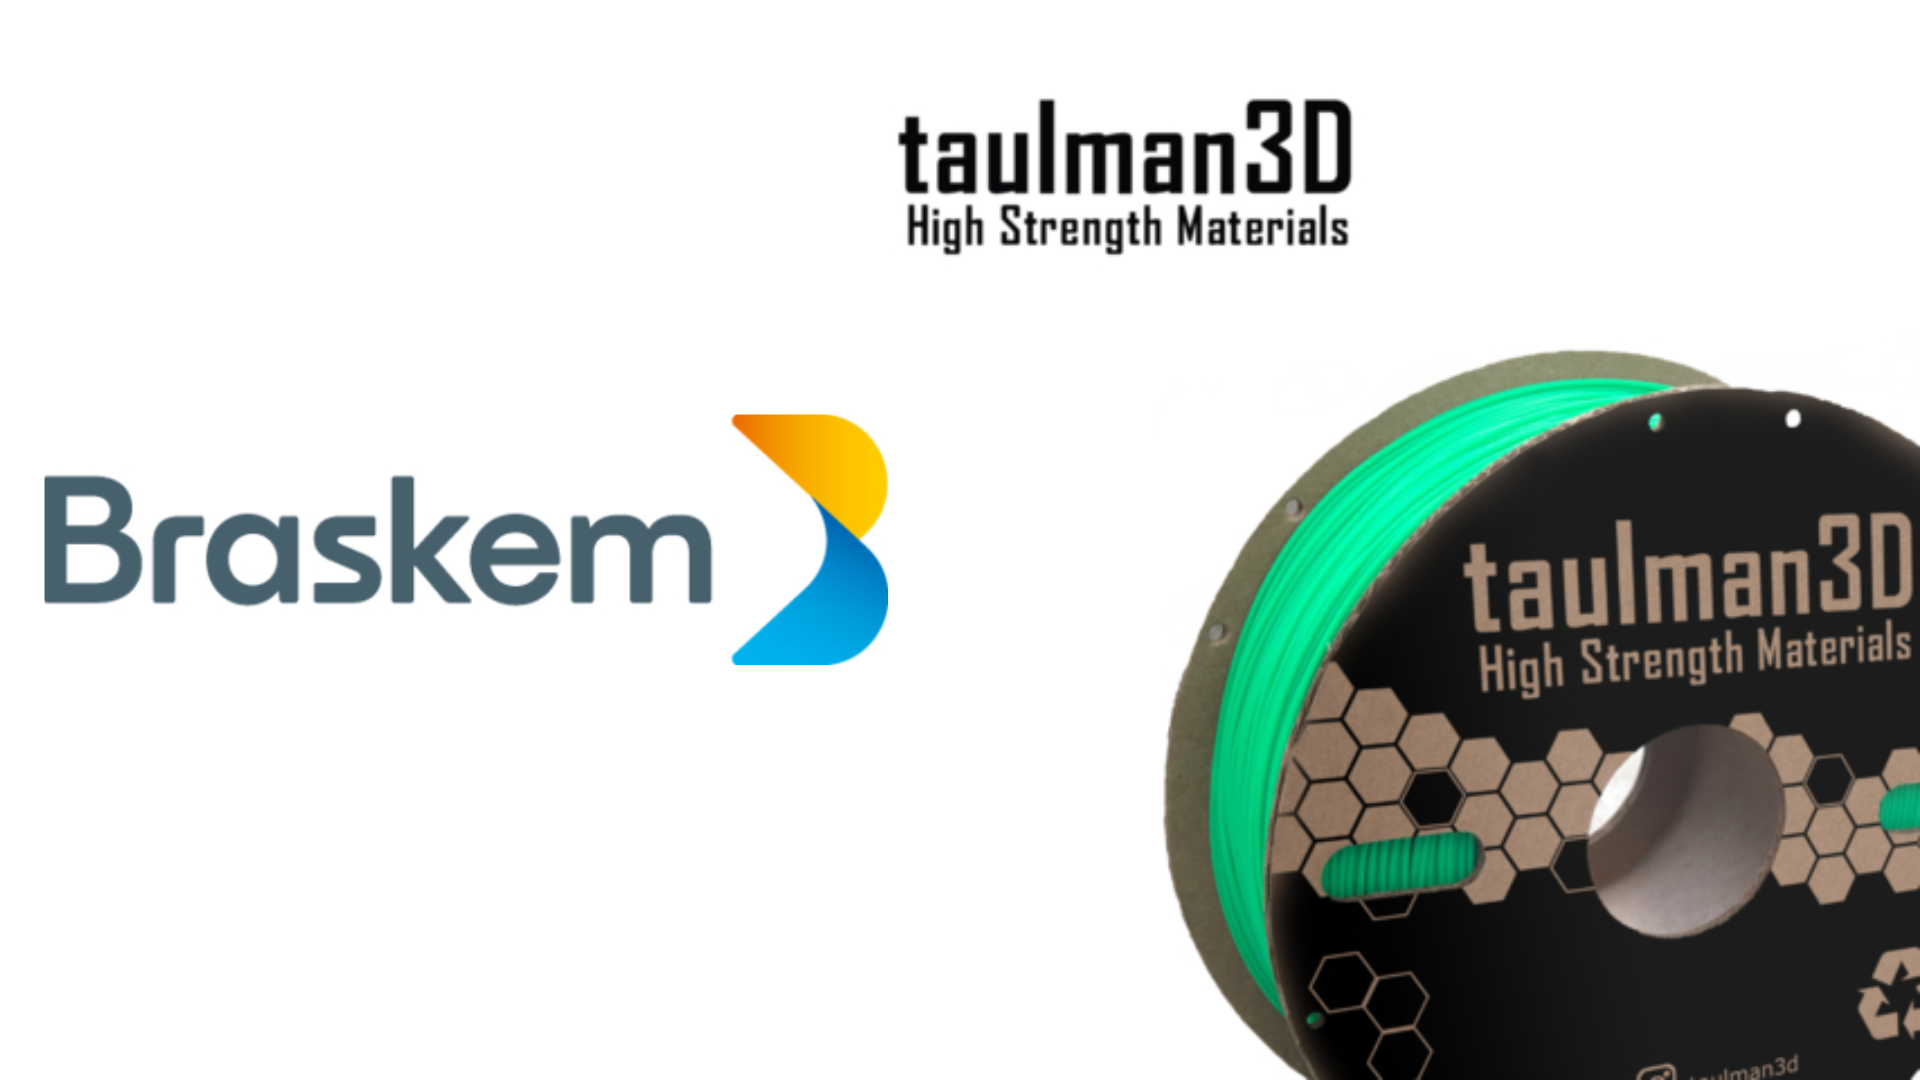 Braskem acquired taulman3D, a filament supplier exoanding their portfolio of additive manufacturing materials.